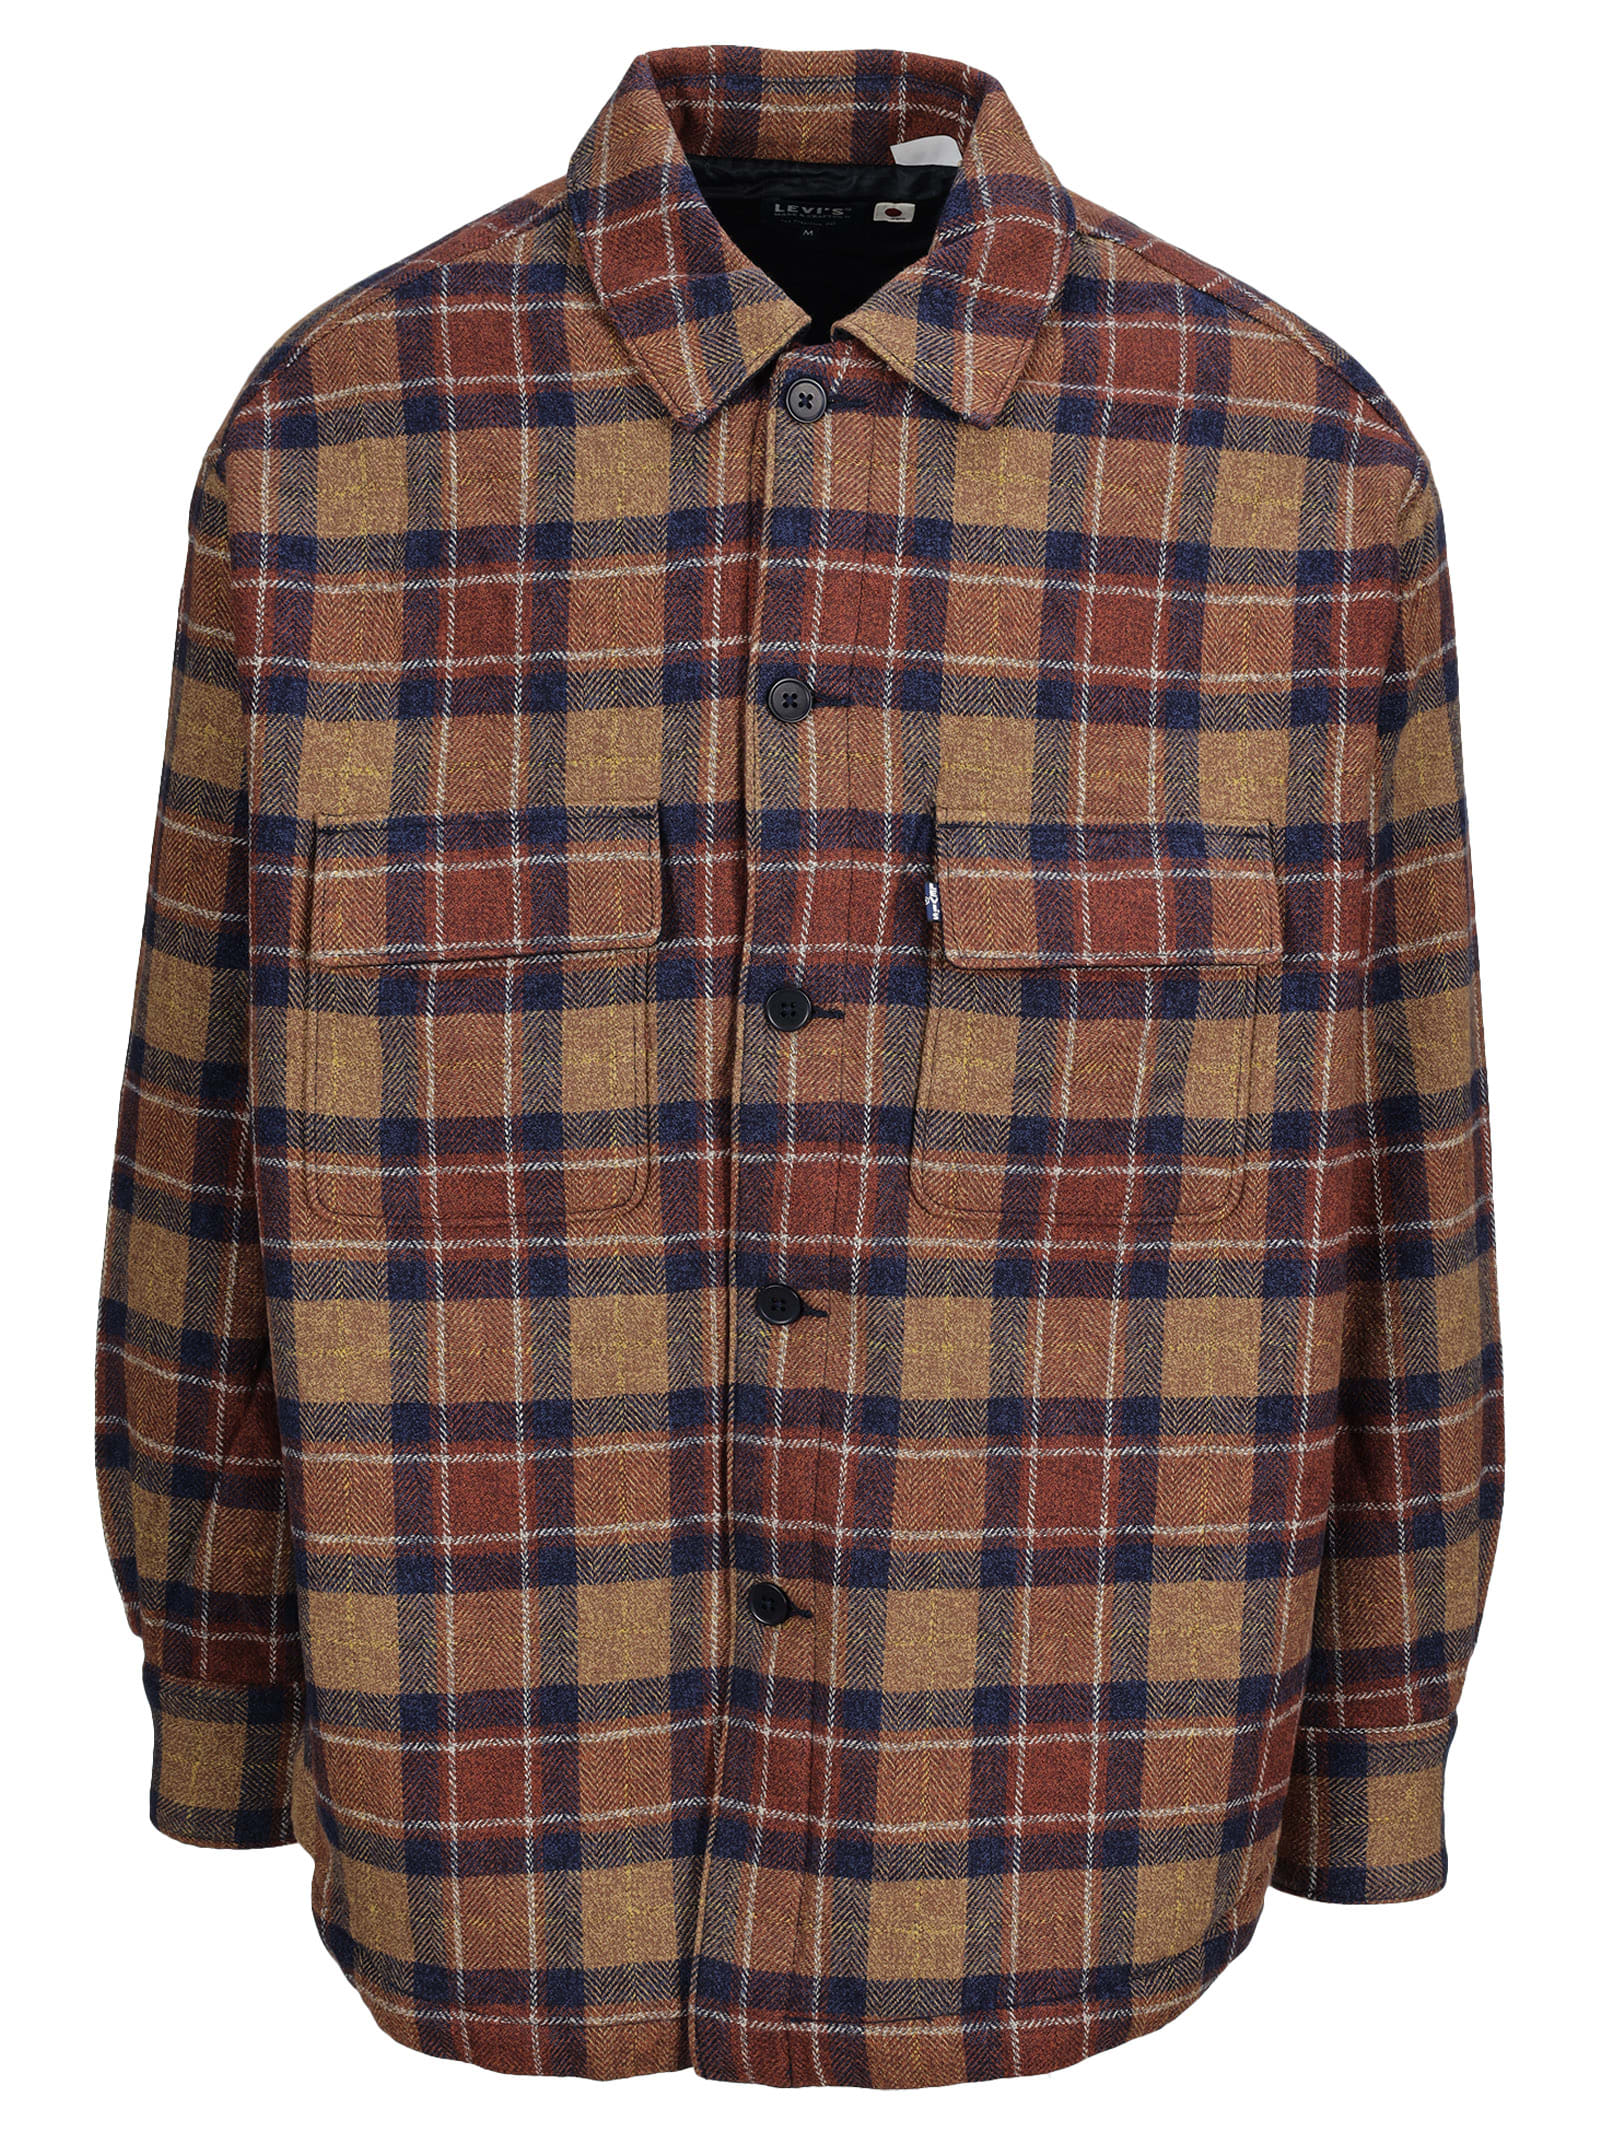 Levis Made & crafted Checked Shirt Jacket